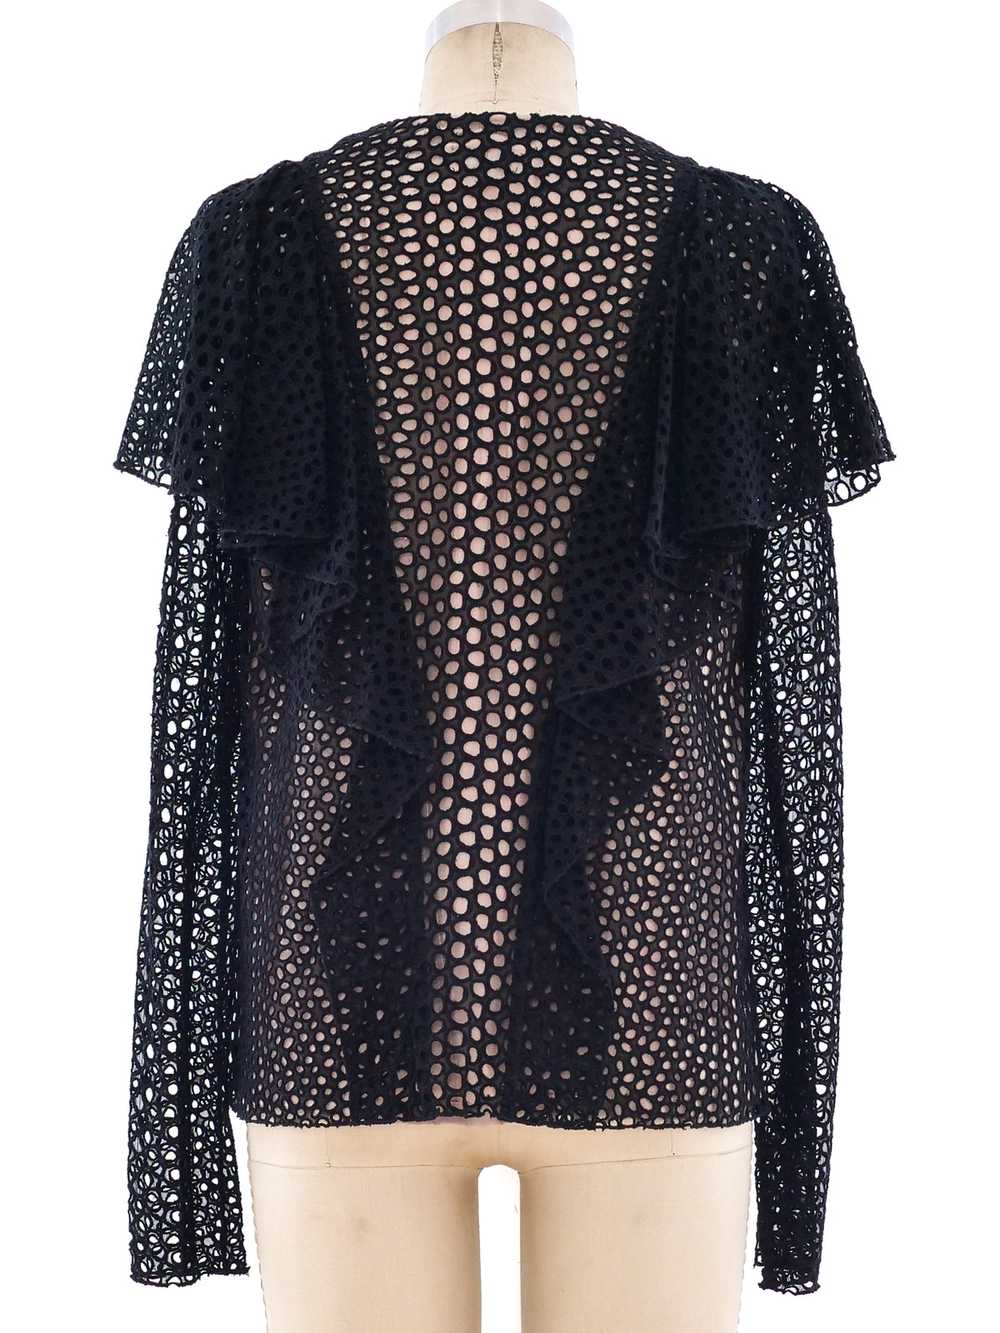 Lanvin Eyelet Button Front Top - image 3